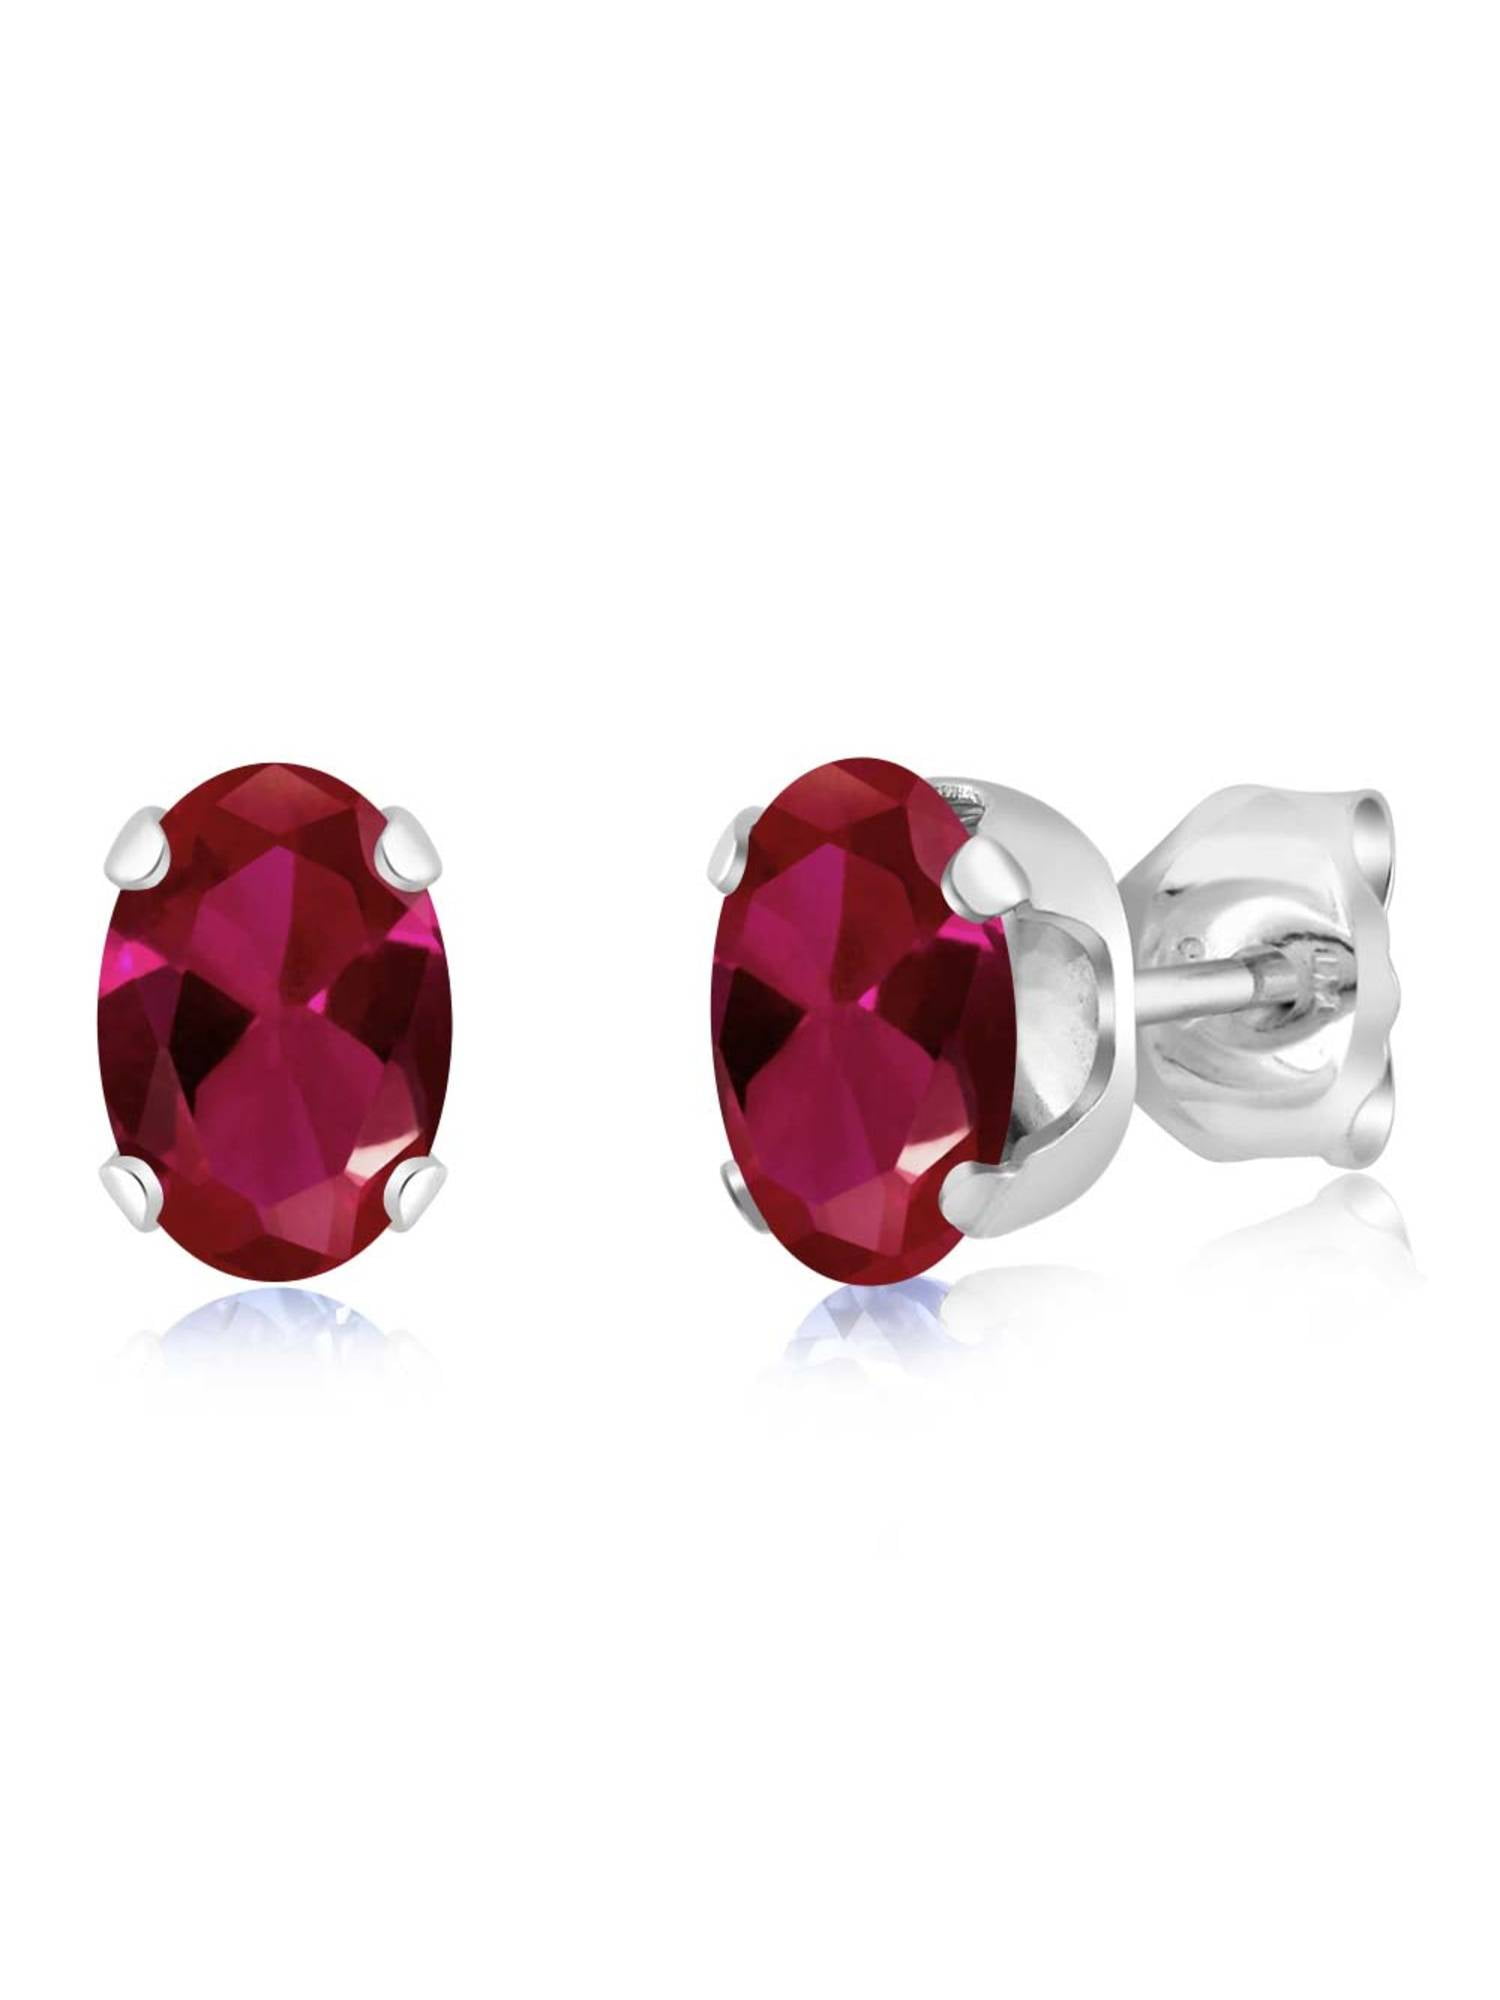 6x4 Mm Ovale Cut Natural Pink ruby Gemstone 925 Sterling Silver Stud Earring 